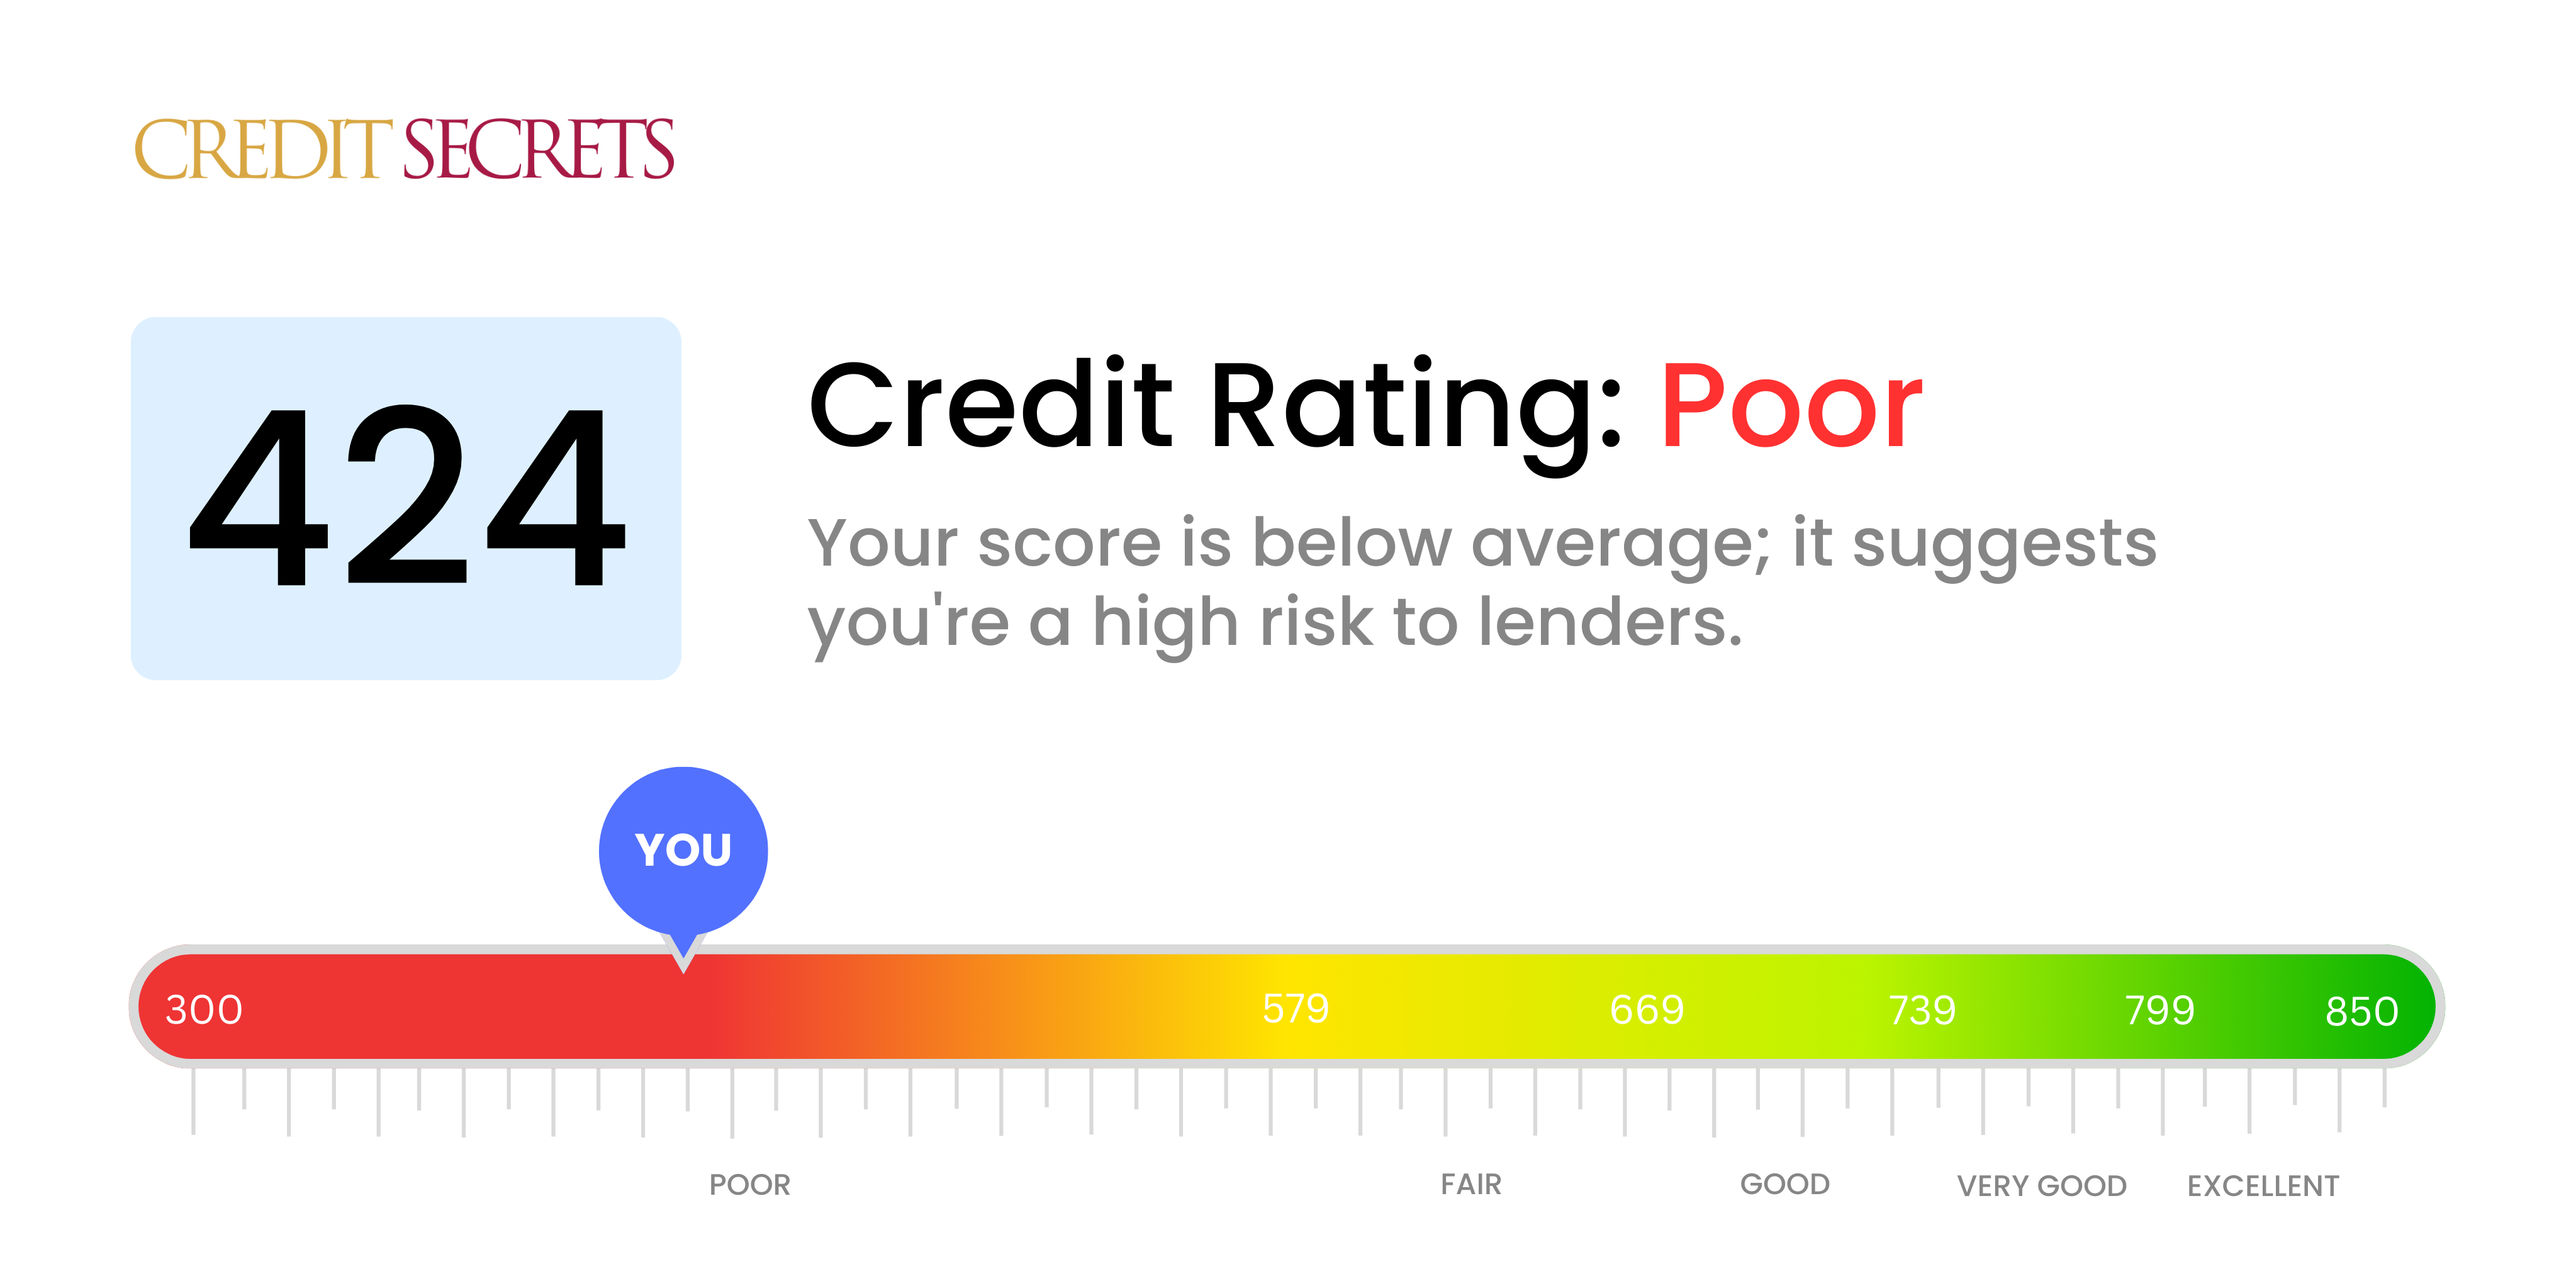 Is 424 a good credit score?